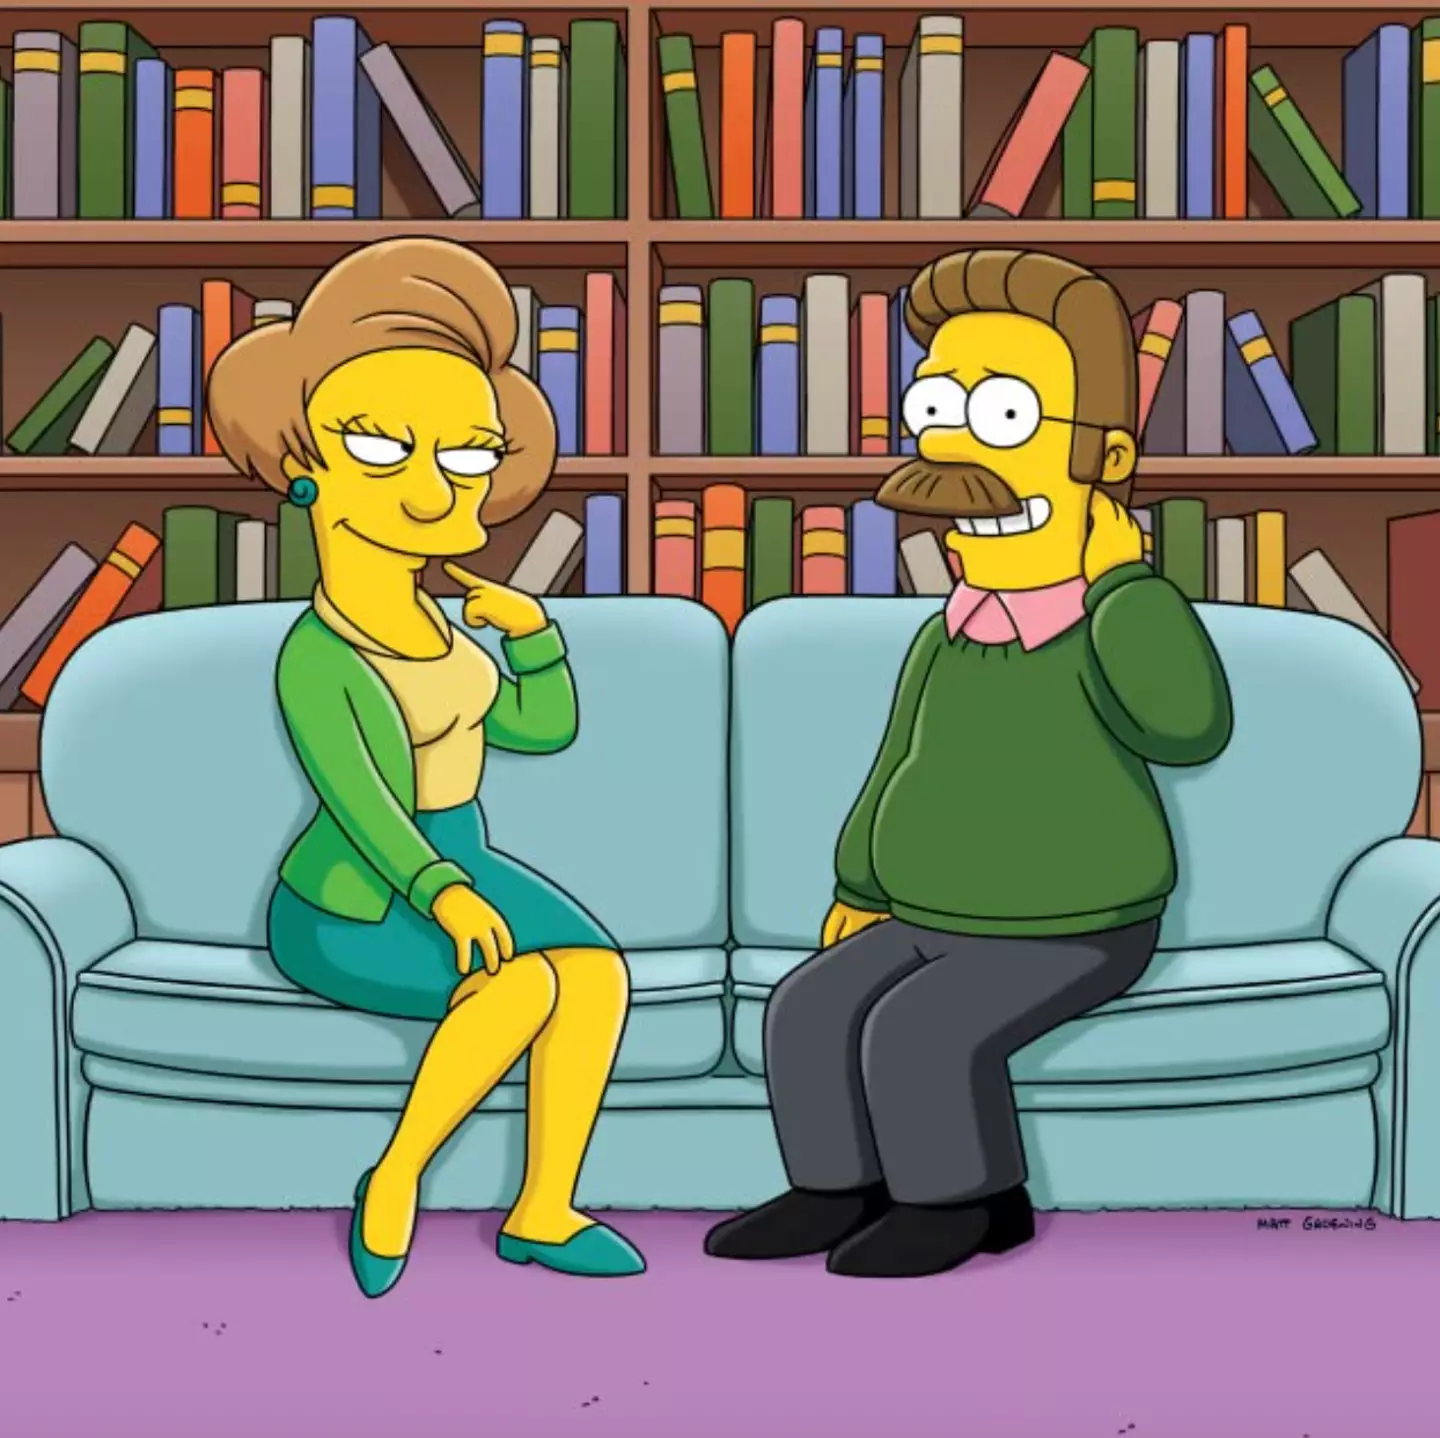 There is a tragic reason behind why The Simpsons killed off Edna Krabappel.